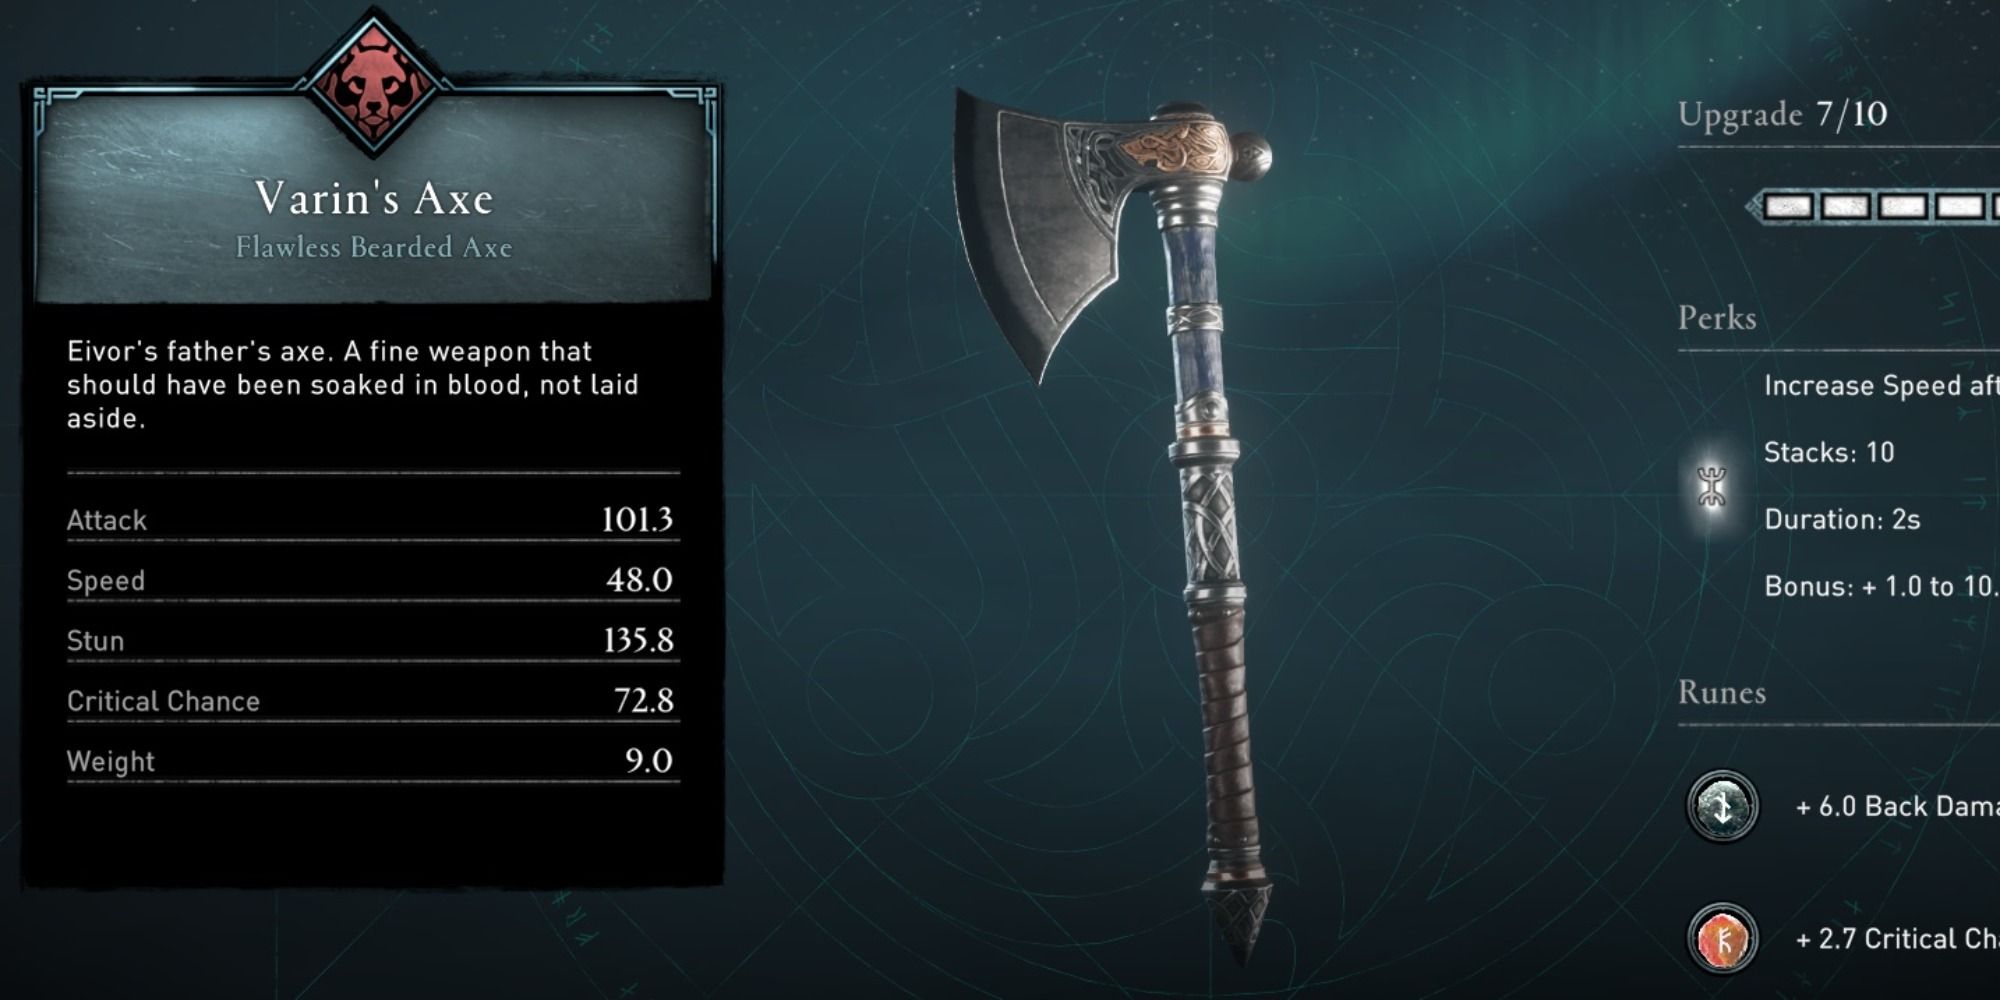 An image of Varins Axe and its stats in Assassins Creed Valhalla